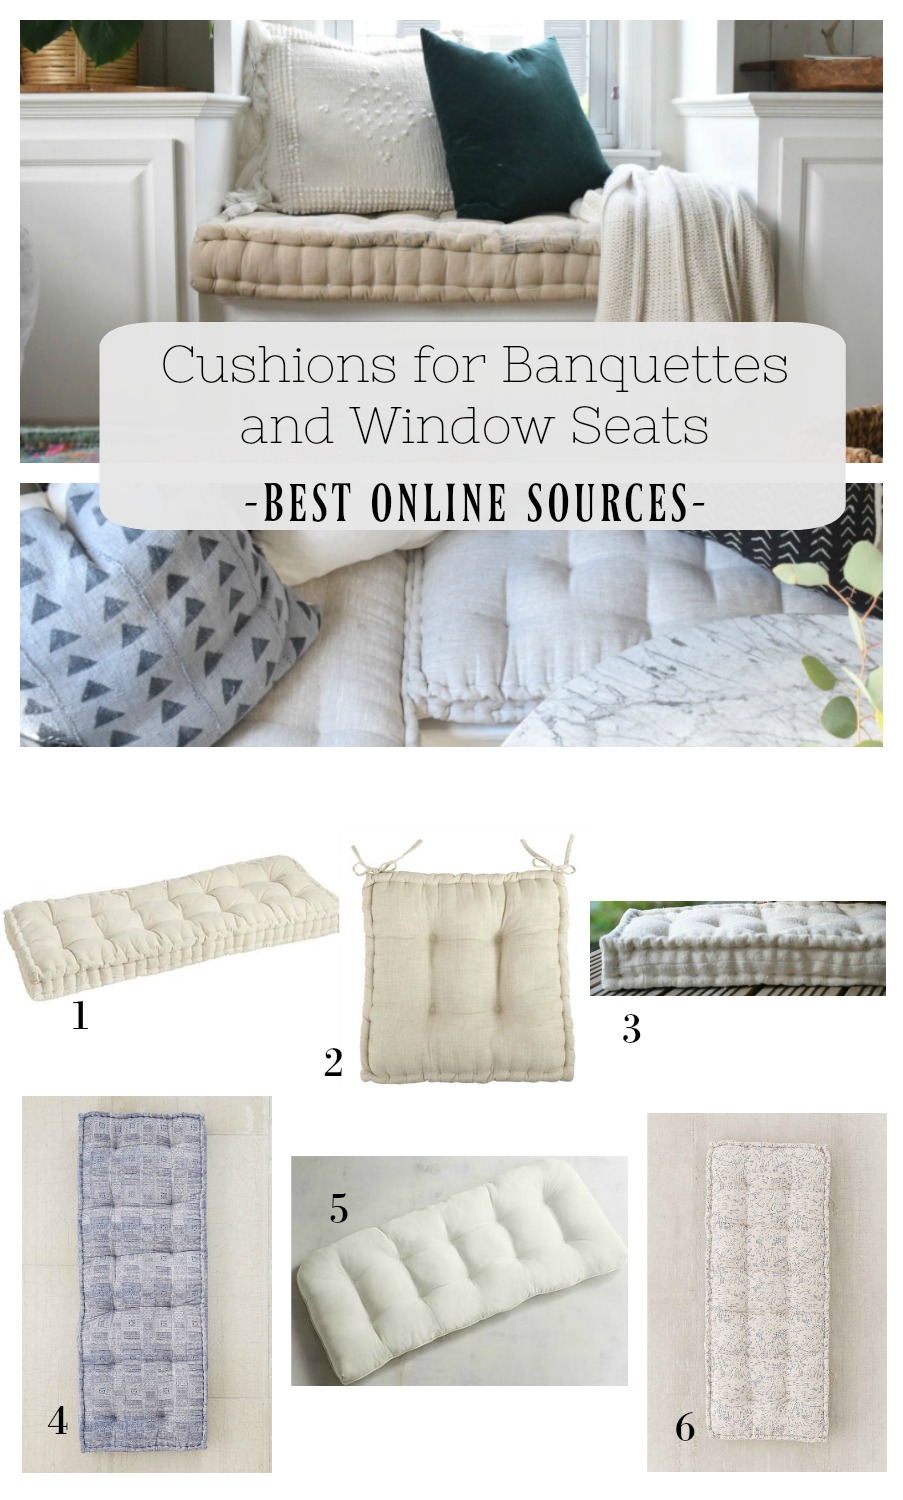 Cushions for Banquettes and Window Seats- Online Sources